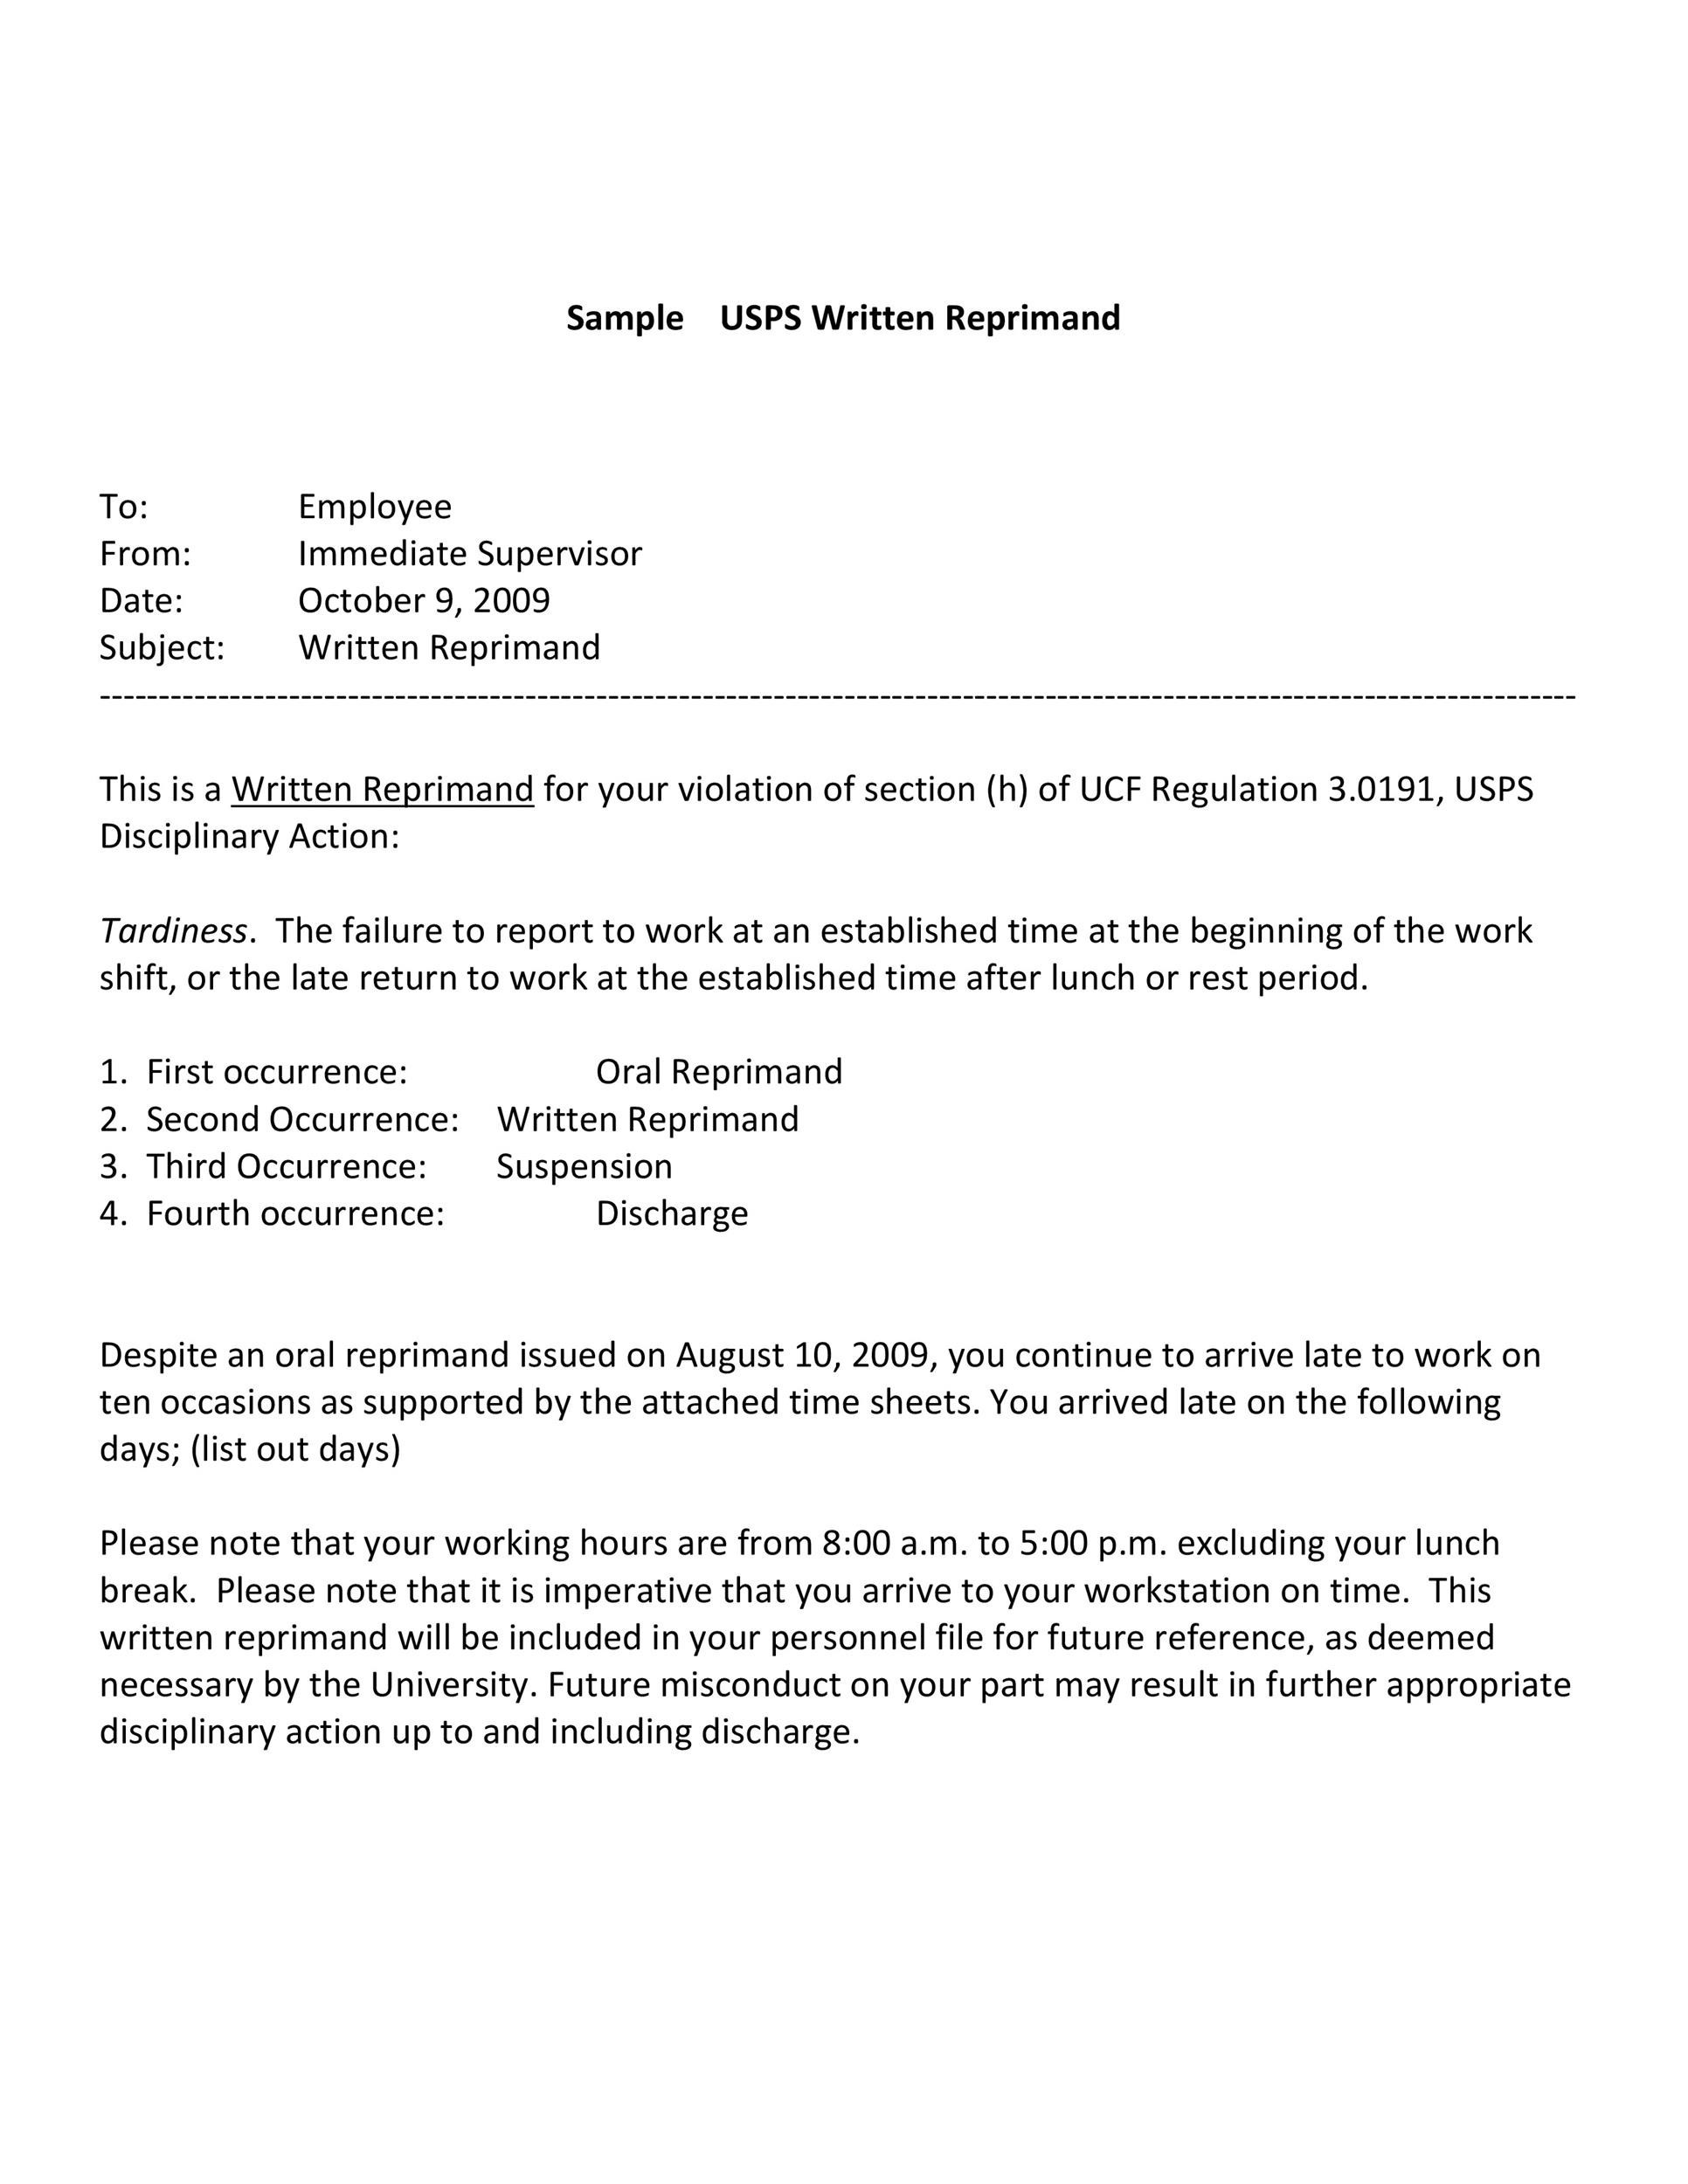 16 Effective Letters of Reprimand Templates (MS Word) ᐅ TemplateLab